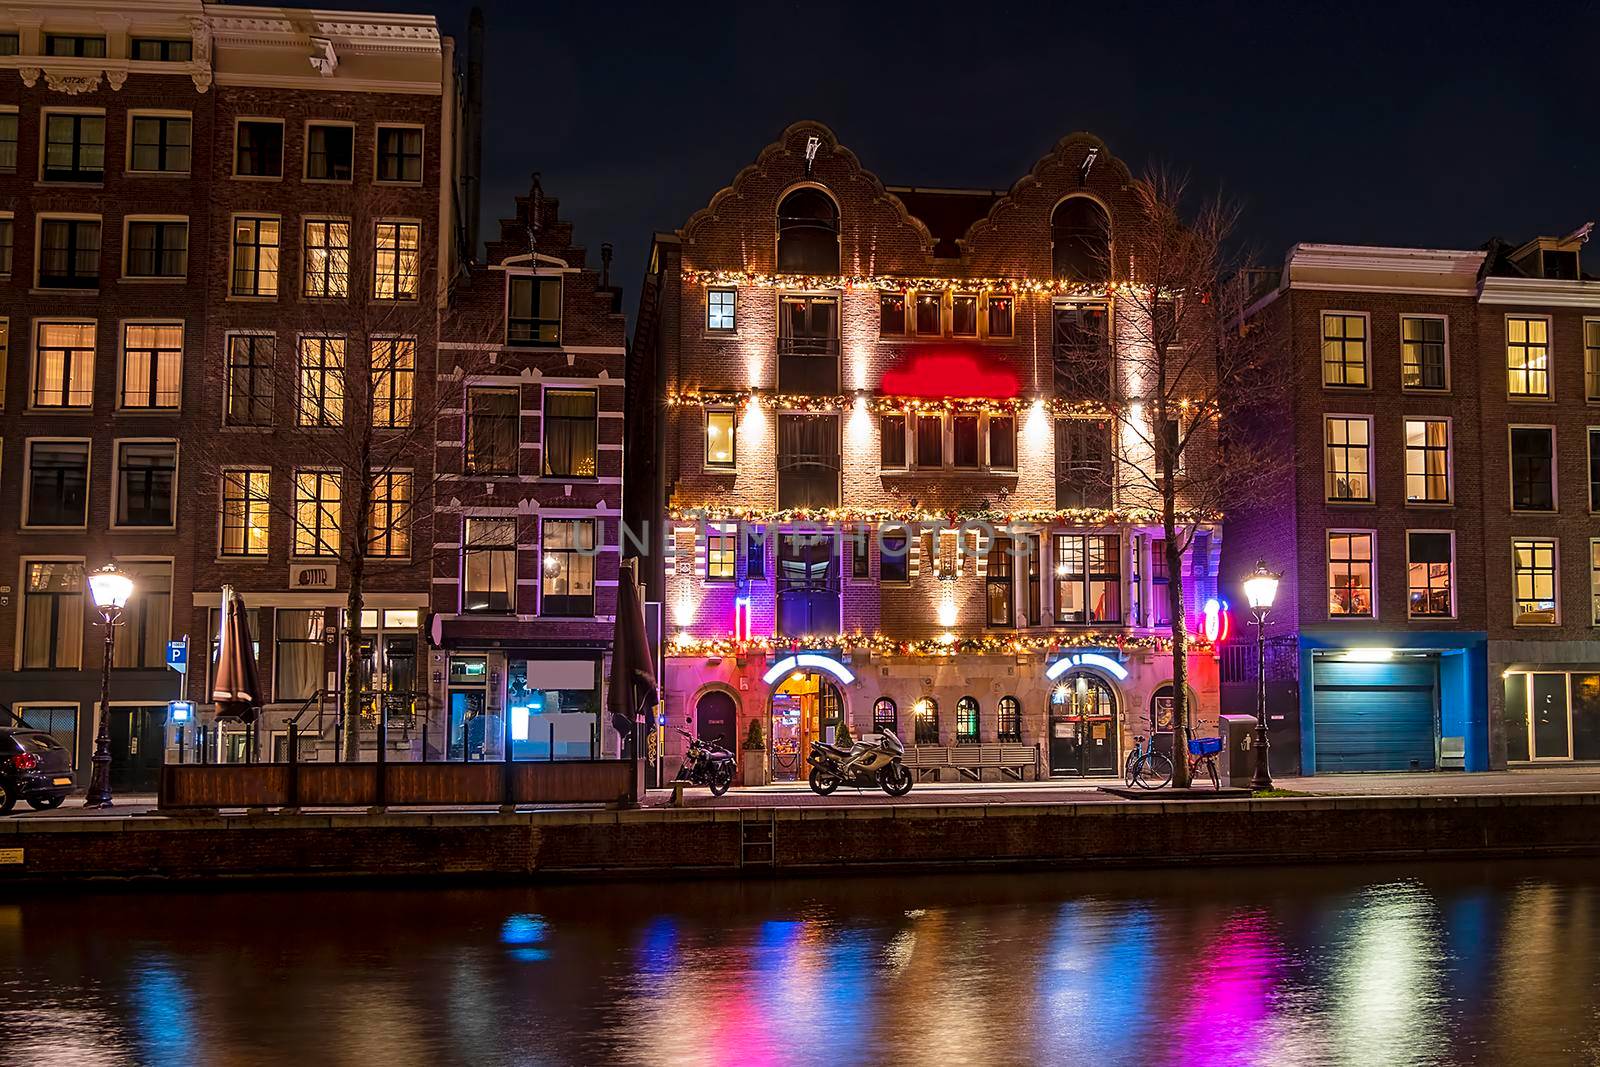 Red light district in Amsterdam the Netherlands by night by devy